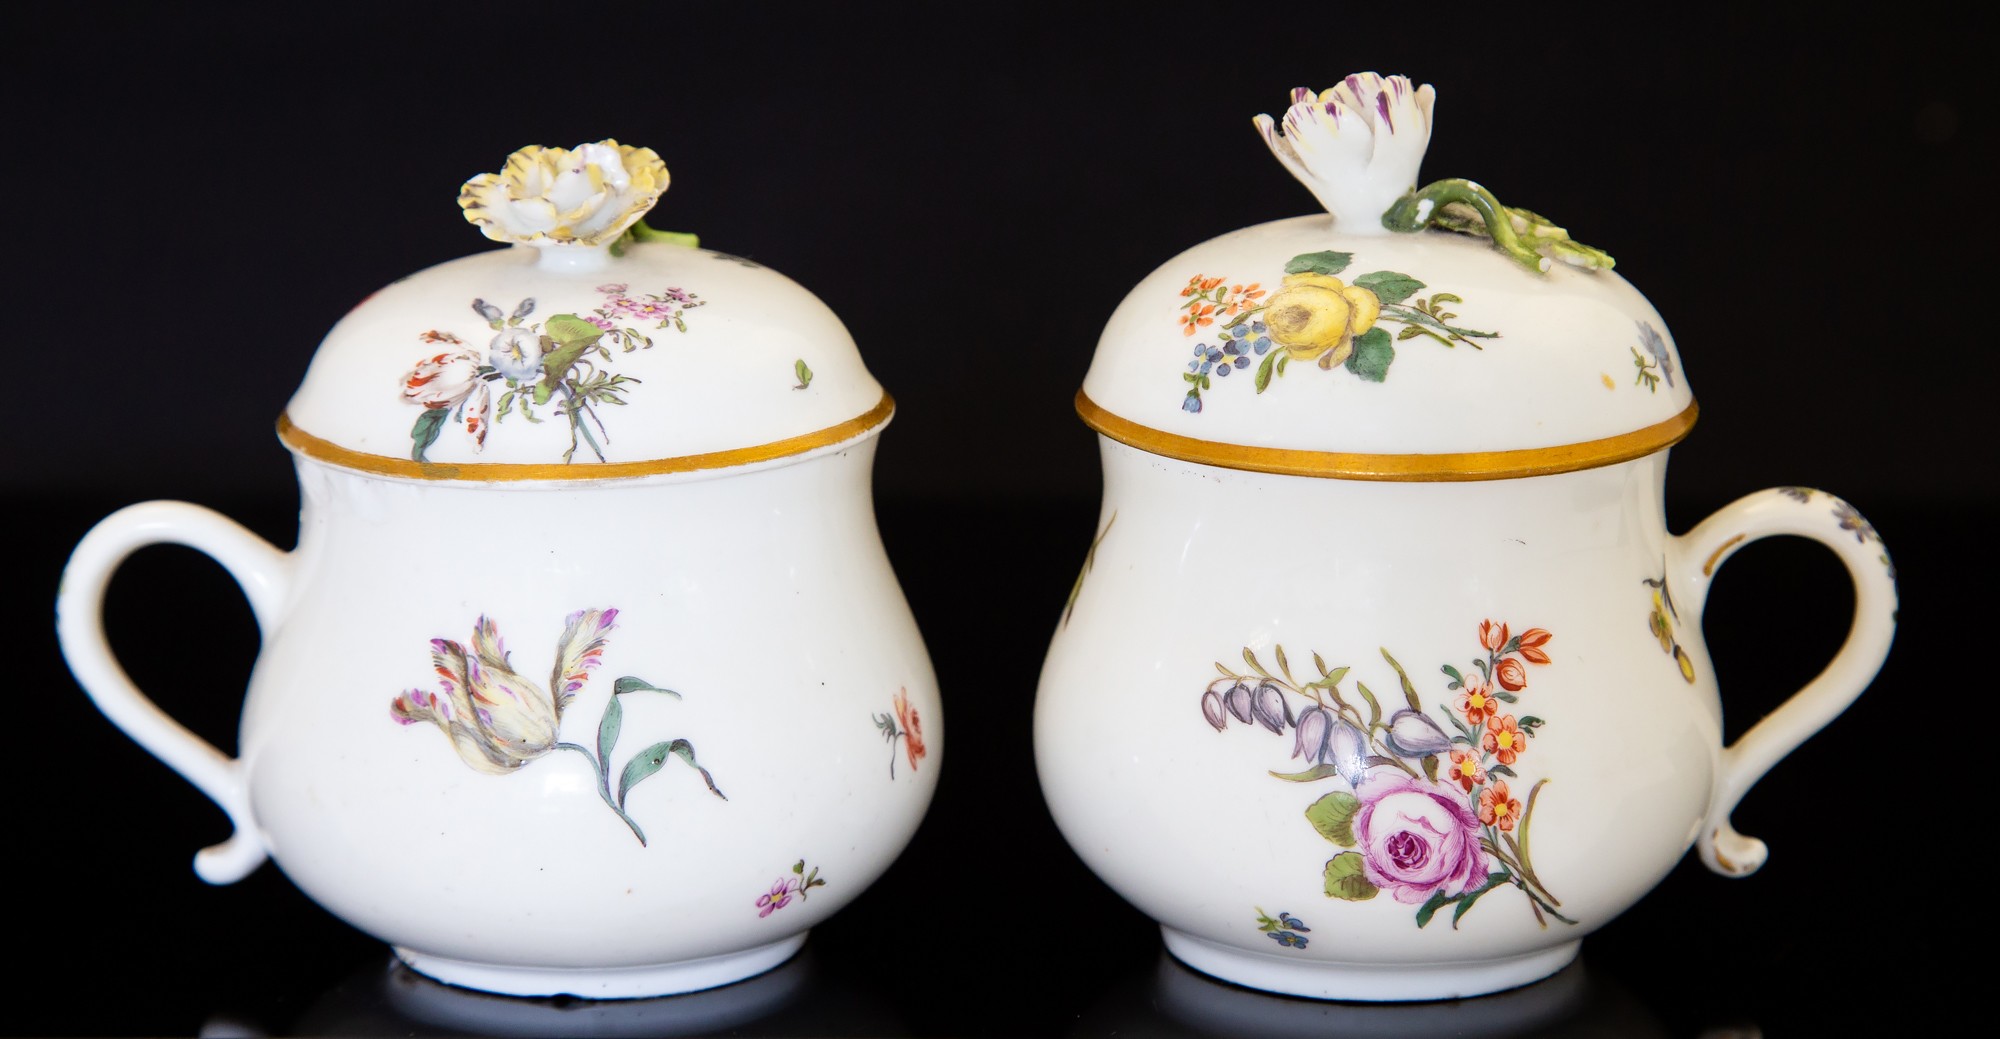 A pair of Meissen chocolate cups and covers, 18th century, circa 1750,